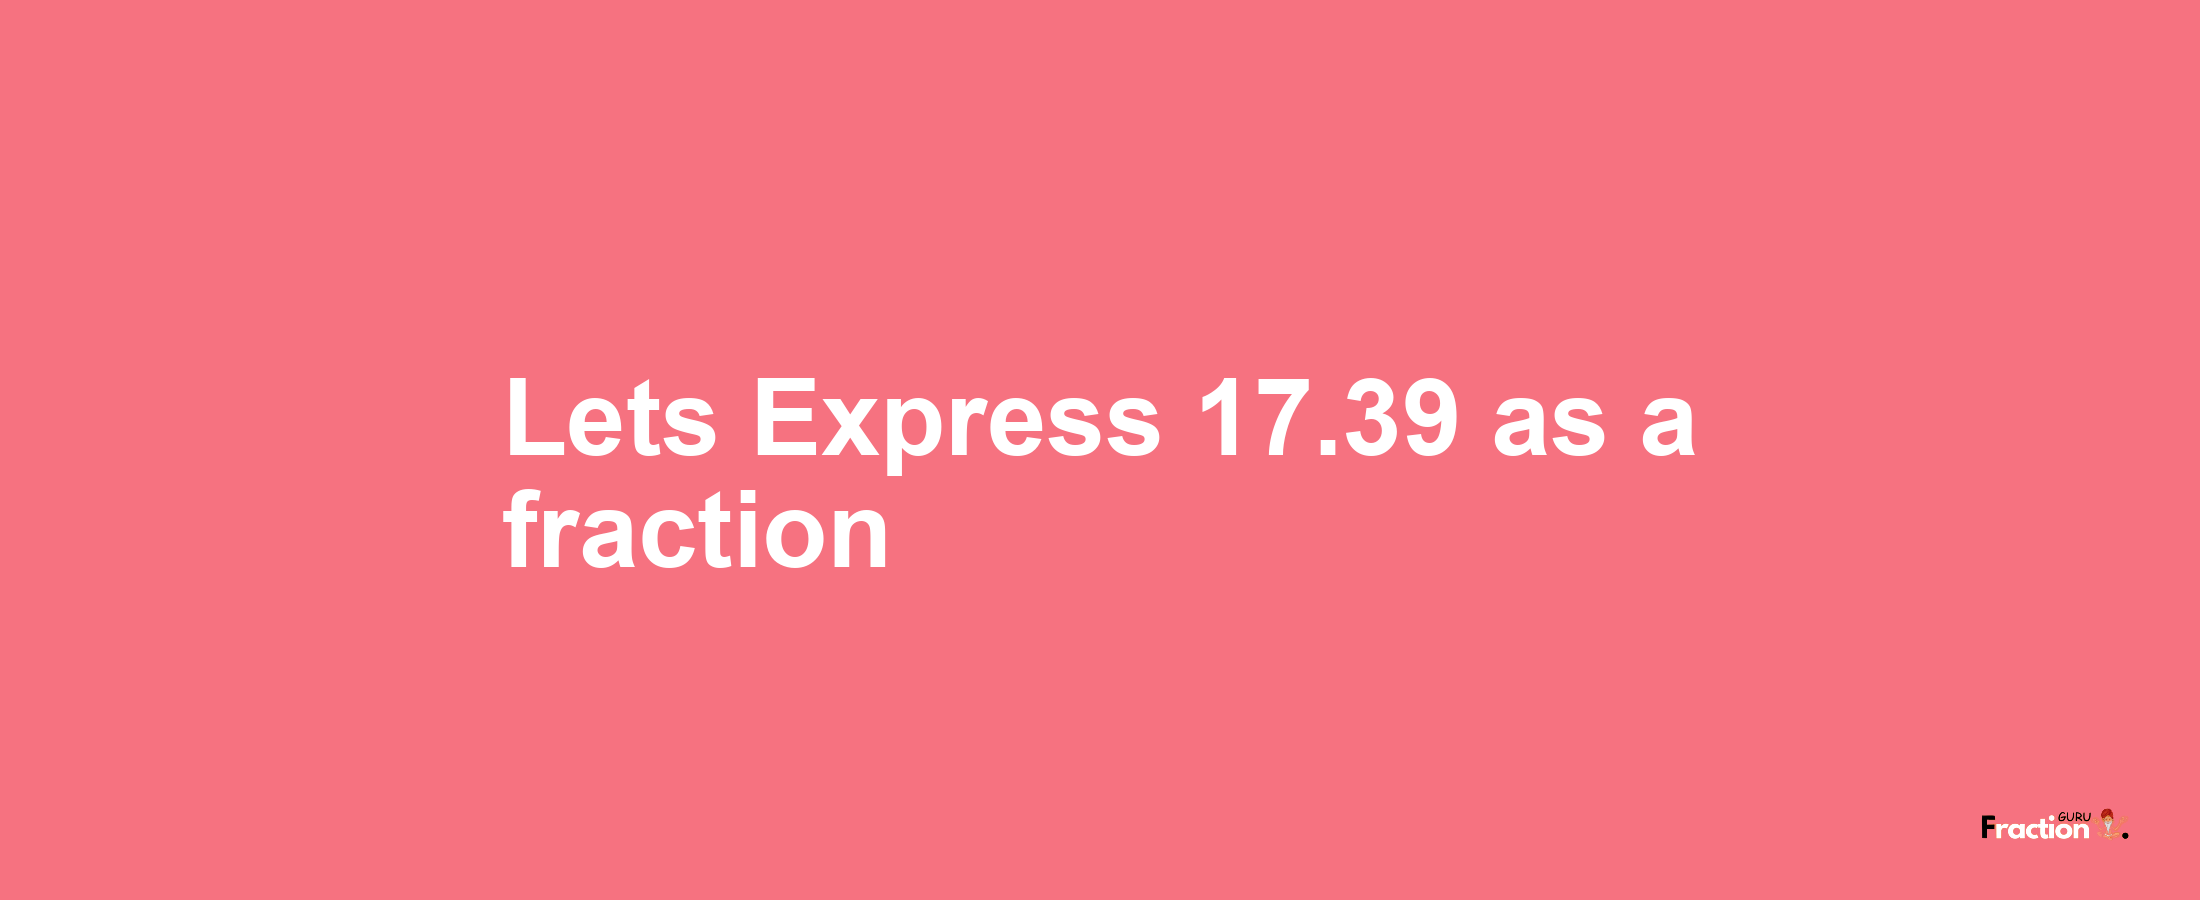 Lets Express 17.39 as afraction